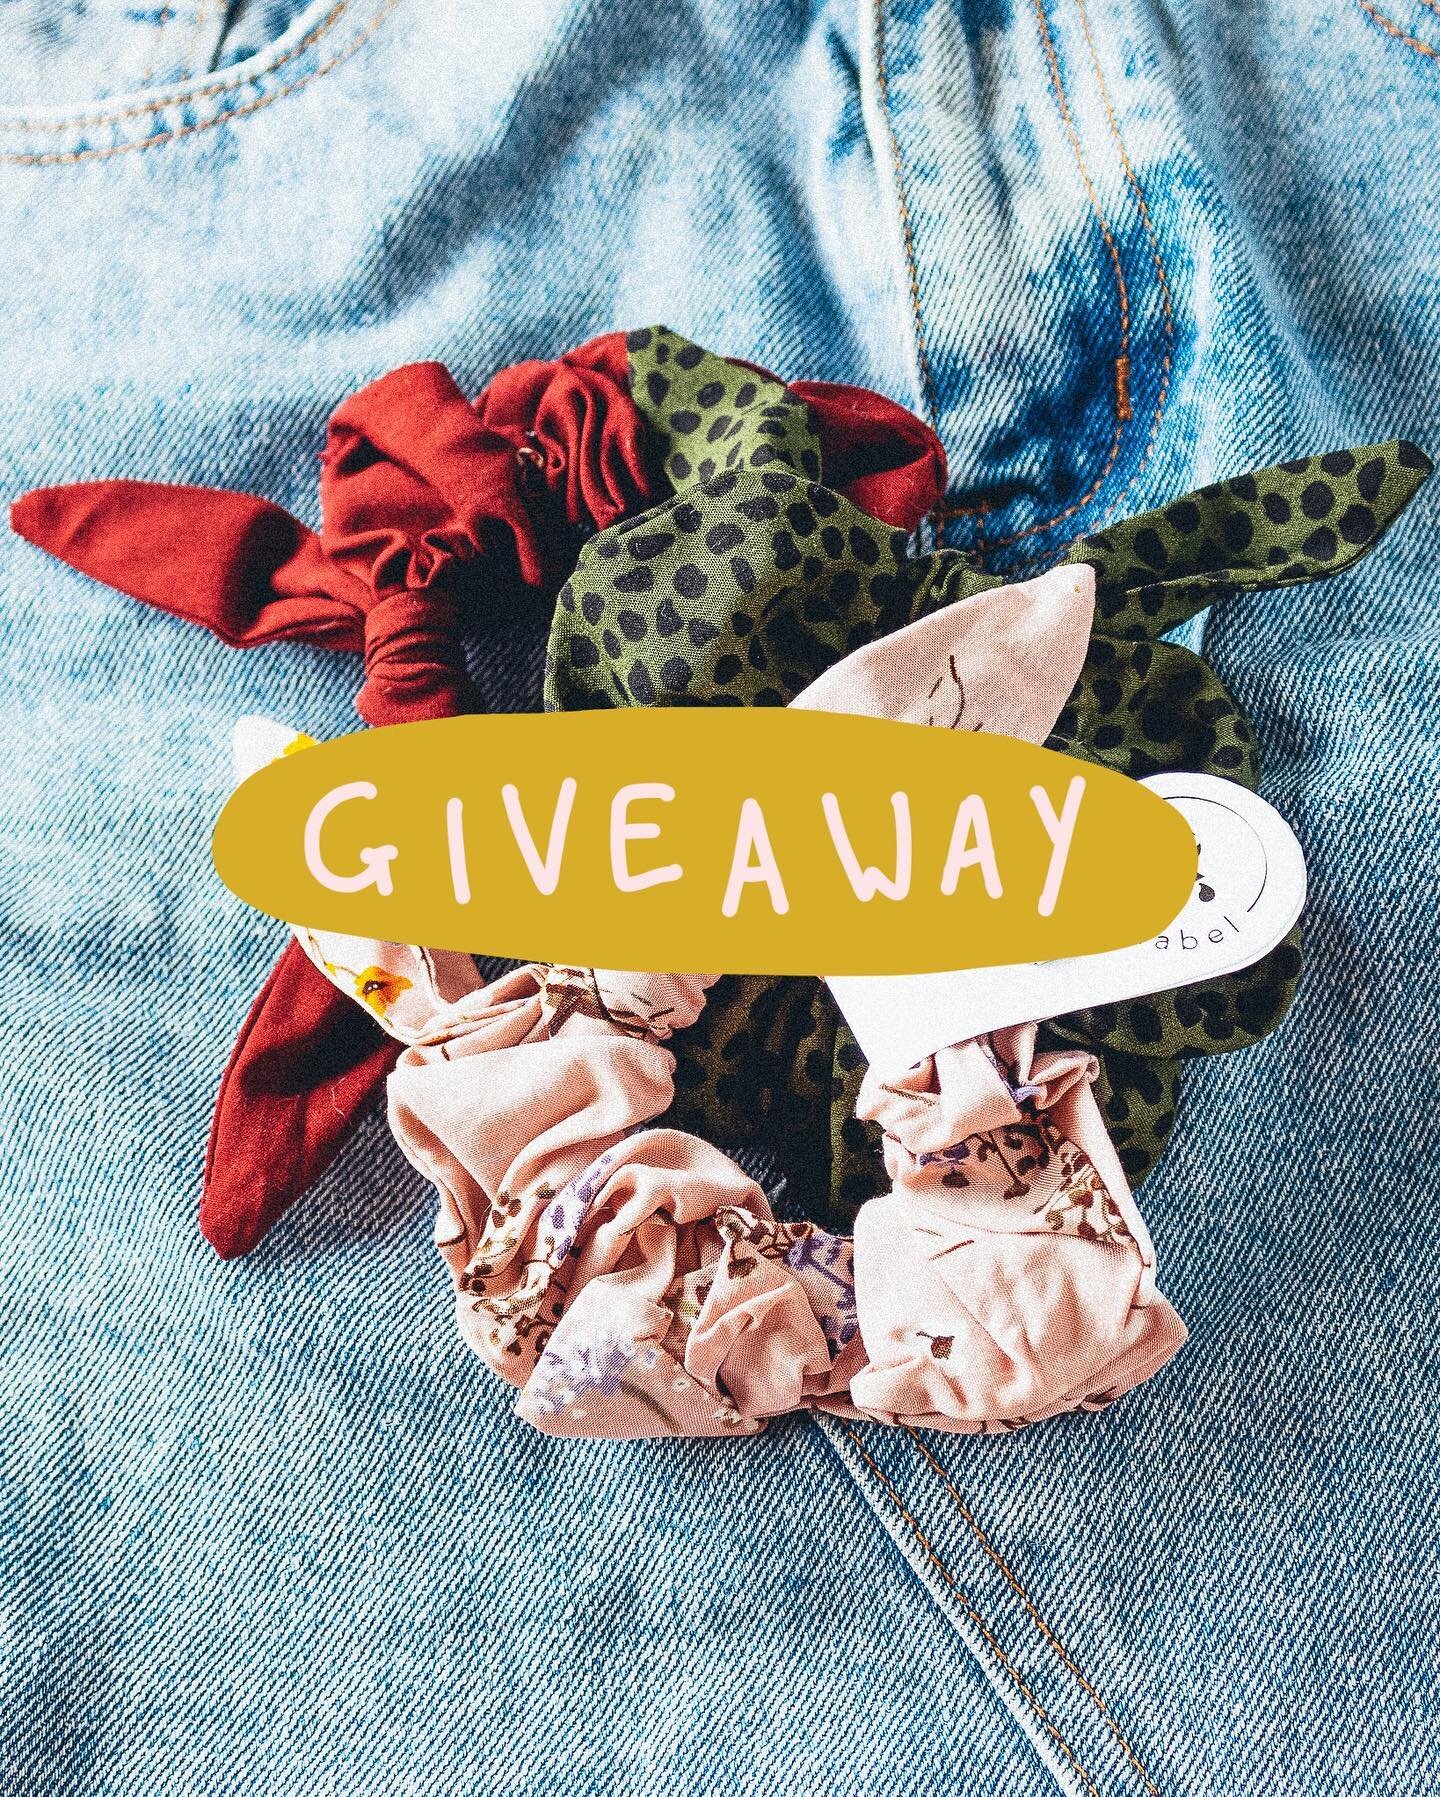 🌟GIVEAWAY!🌟

I have been making so many scrunchies lately, I thought I&rsquo;d try something fun. I&rsquo;m giving away this cute set of 3 bow scrunchies! All you have to do is:
- Go to my latest video on YouTube (link in bio) and comment on the vi